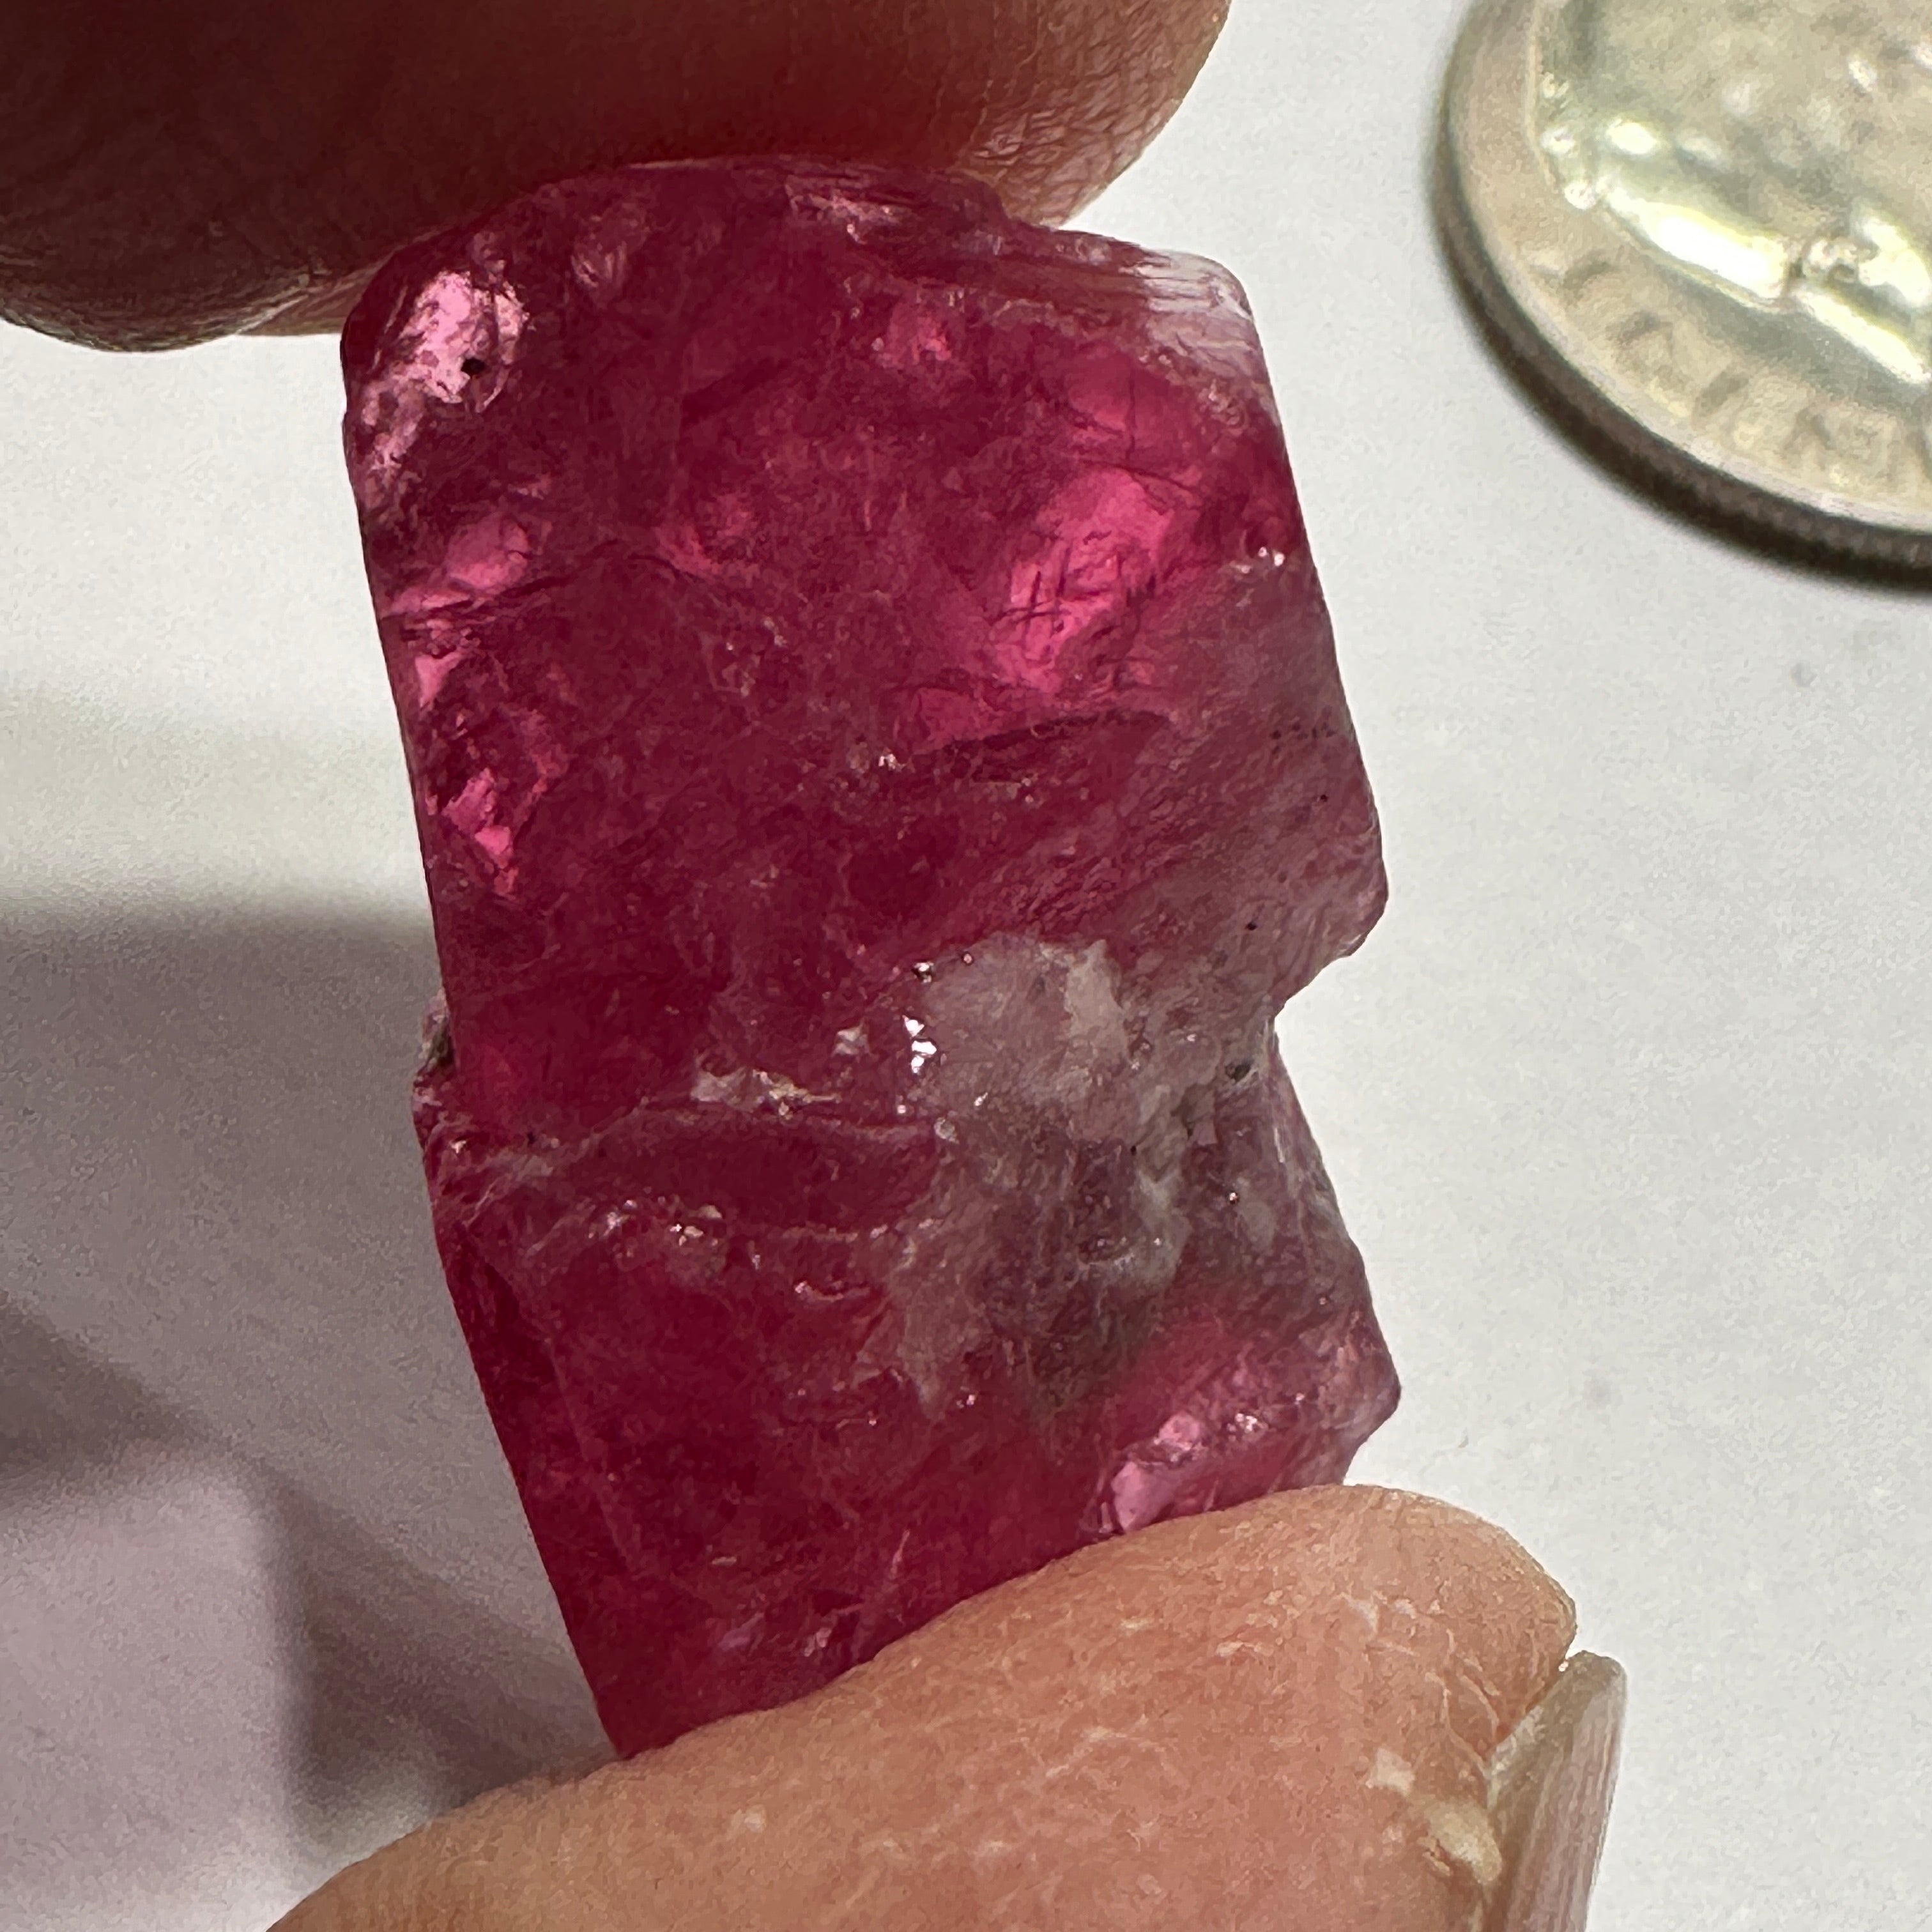 22.51ct Mahenge Red Spinel Crystal, WITH SMALL FACETABLE PORTIONS, Tanzania, Untreated, Unheated. 17.2 x 11.4 x 12.2 mm